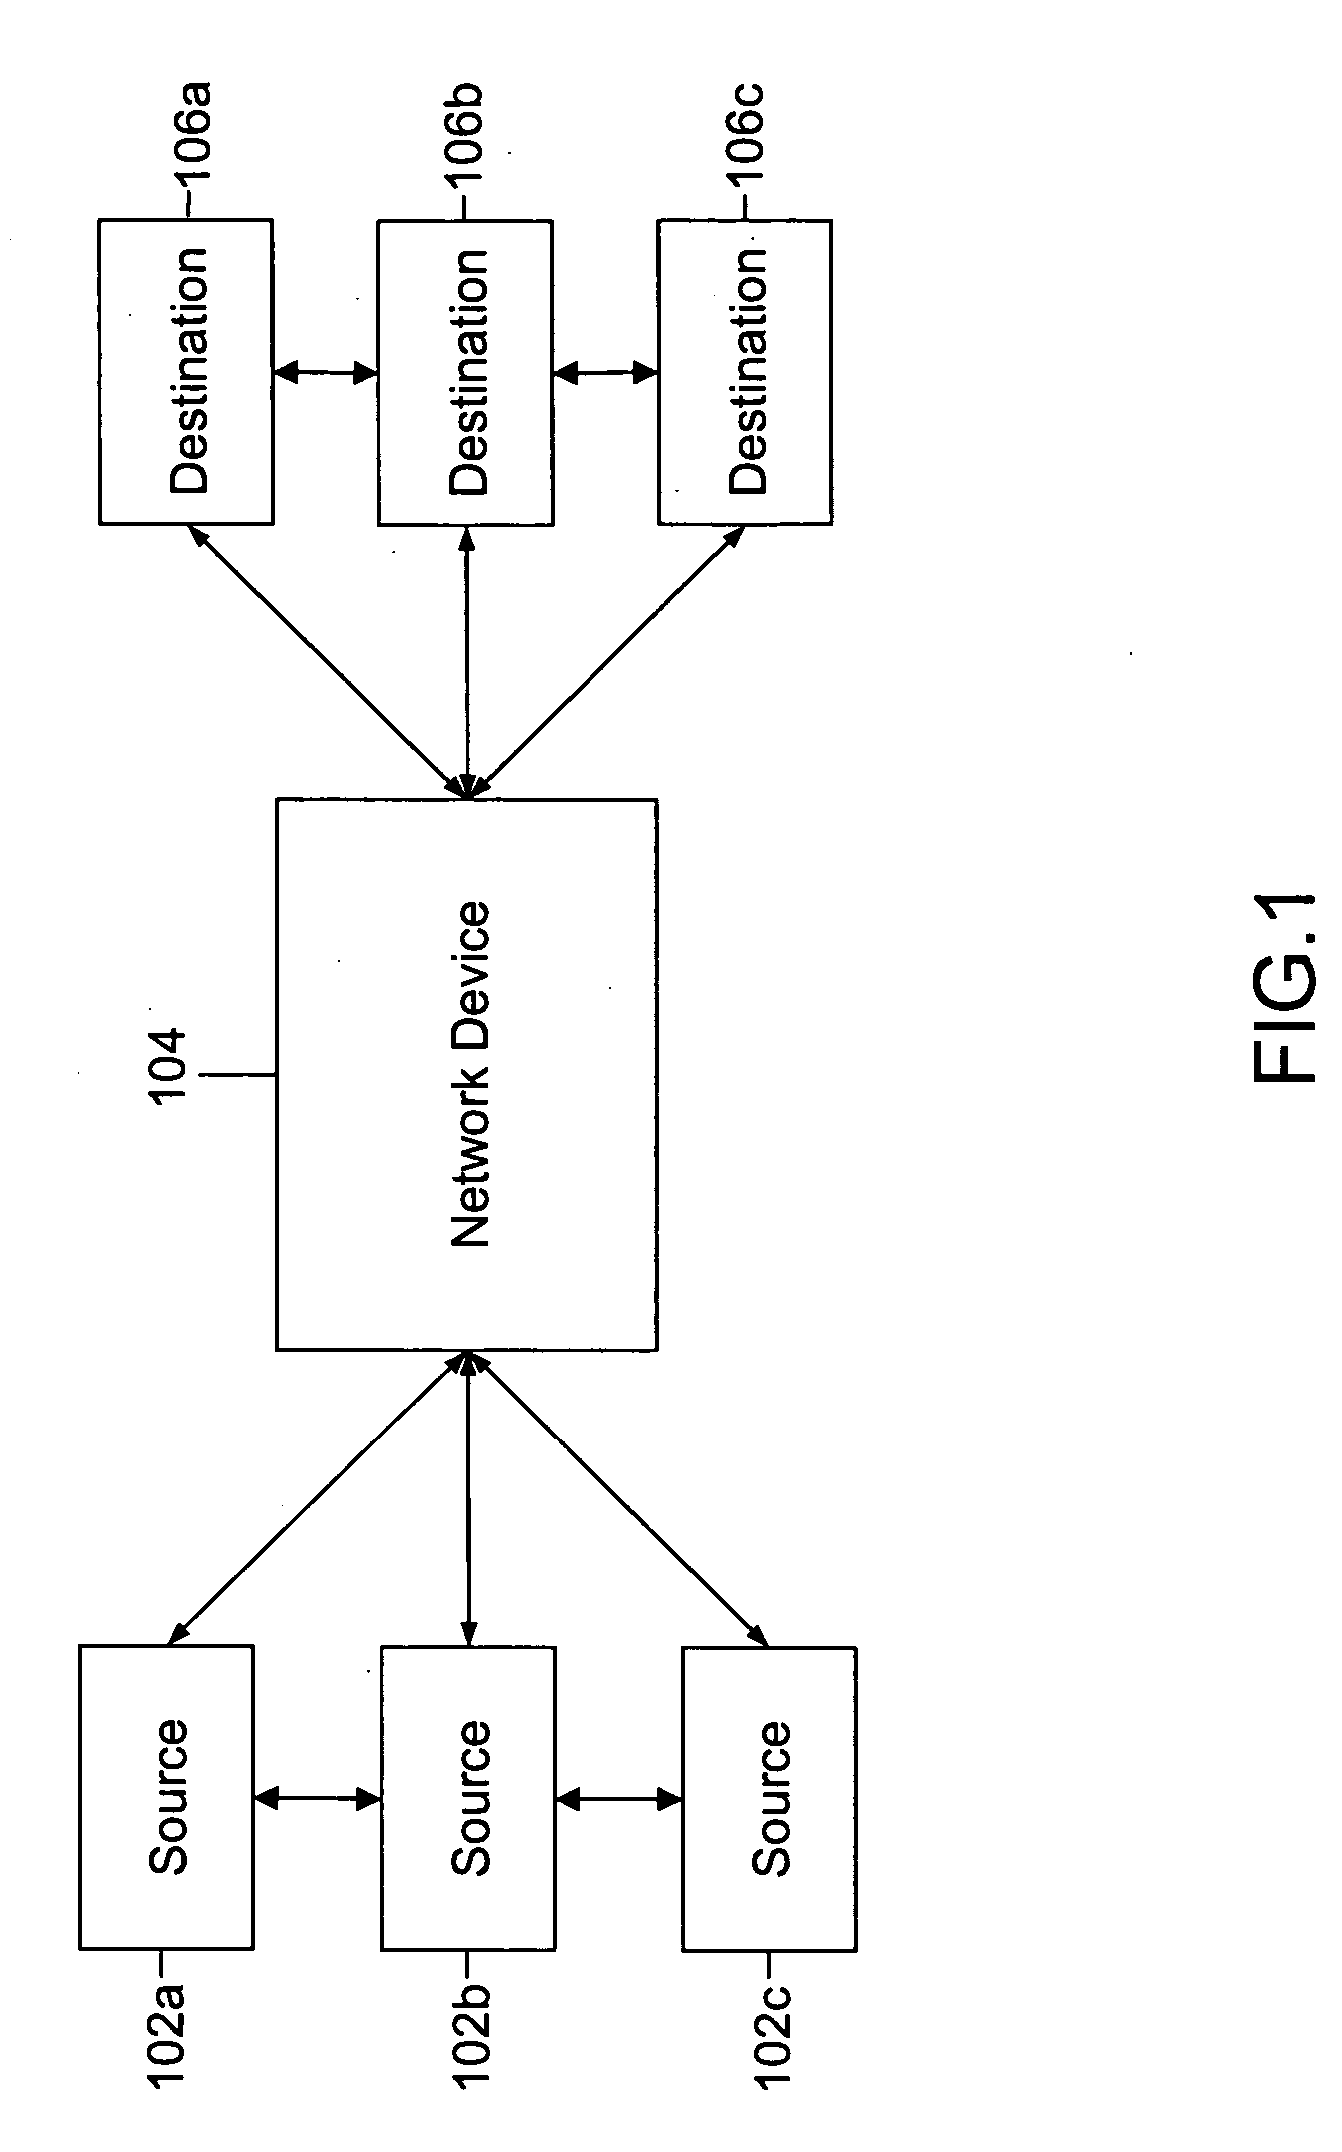 Method and system for in-band signaling of multiple media streams